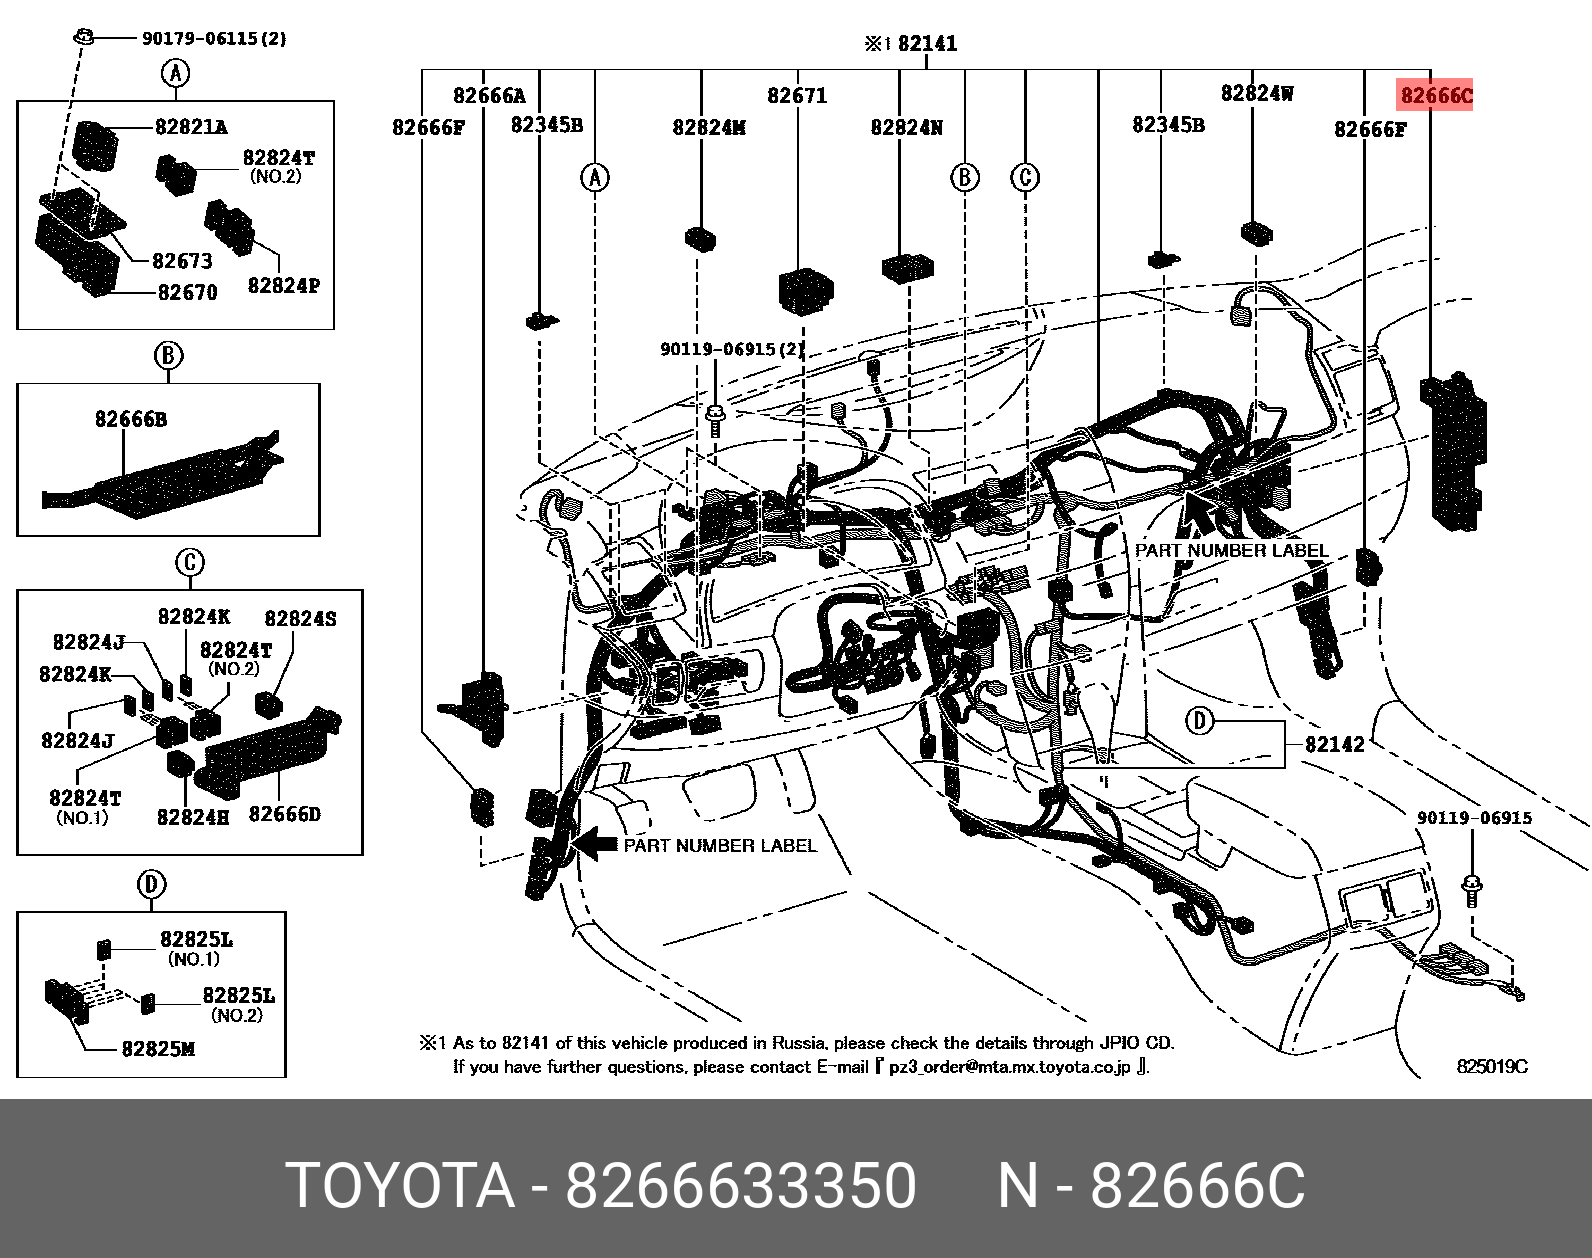 CAMRY 200601 - 201108, HOLDER, CONNECTOR NO.4